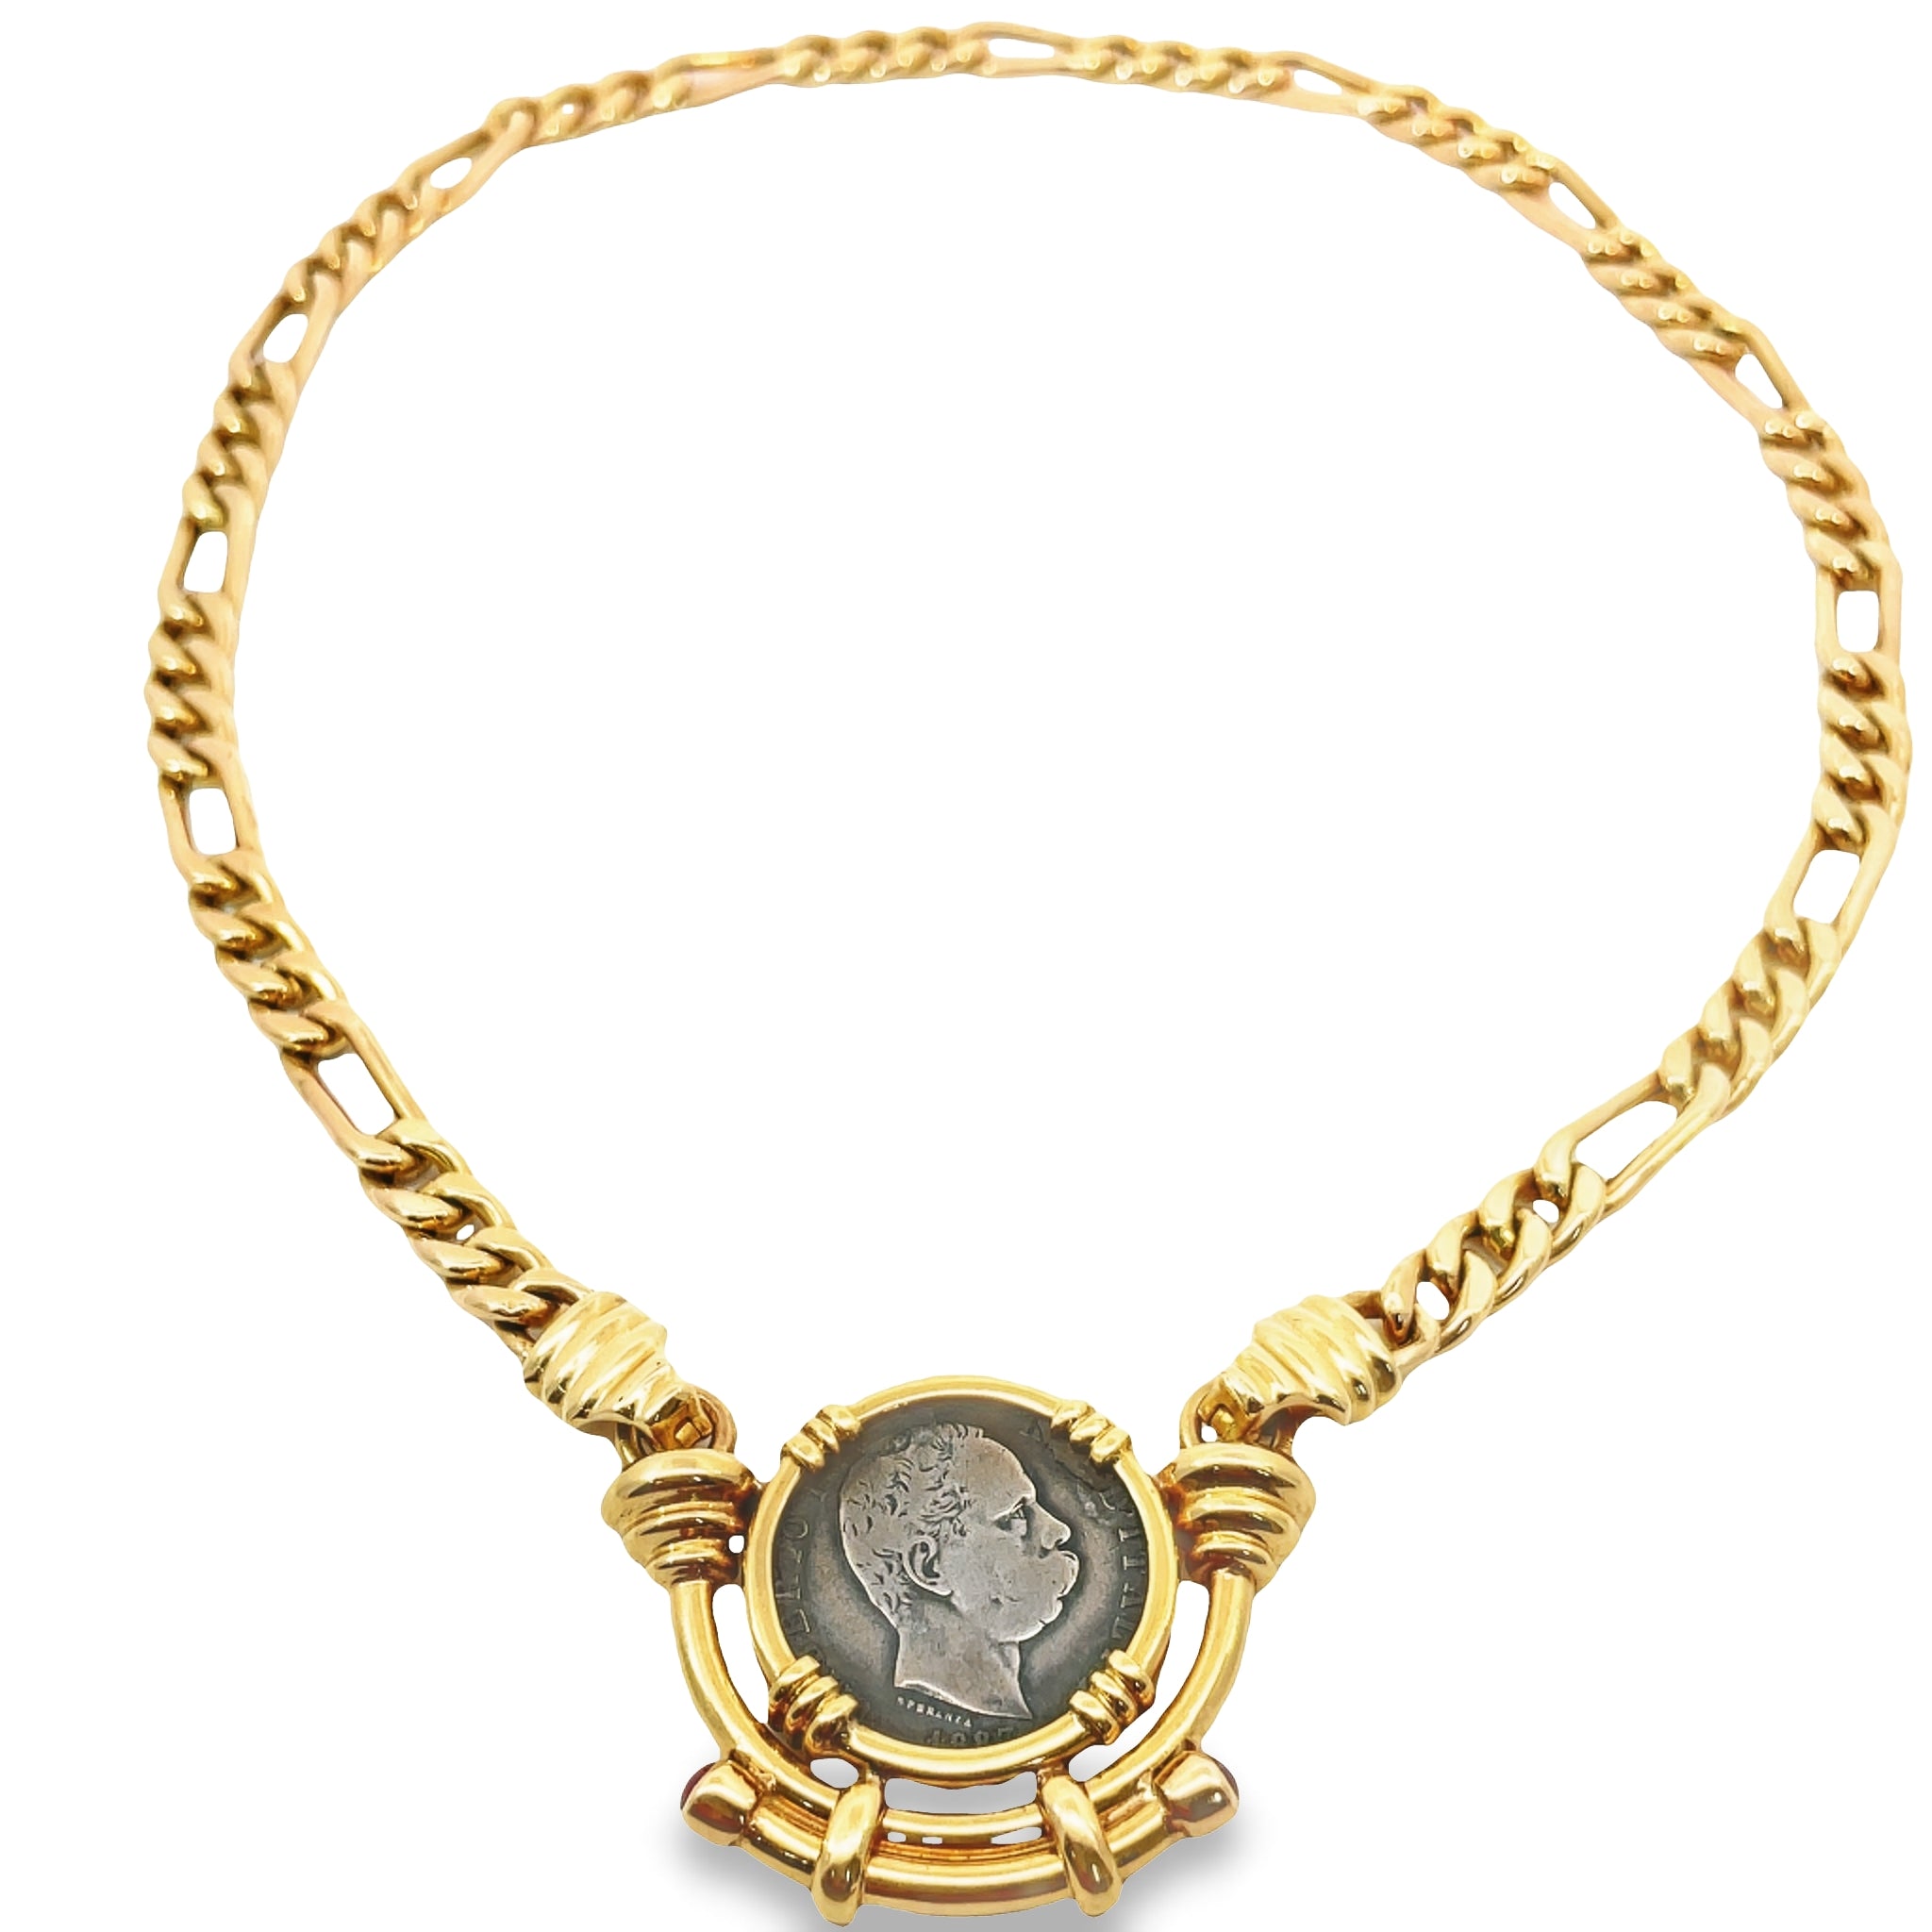 Beautifully crafted from original silver coins and bezel set in 18k yellow gold, this Interchangeable Coin Pendant makes the perfect statement piece to add to any look. Enhance your style and make a lasting impression with this timeless and unique piece!